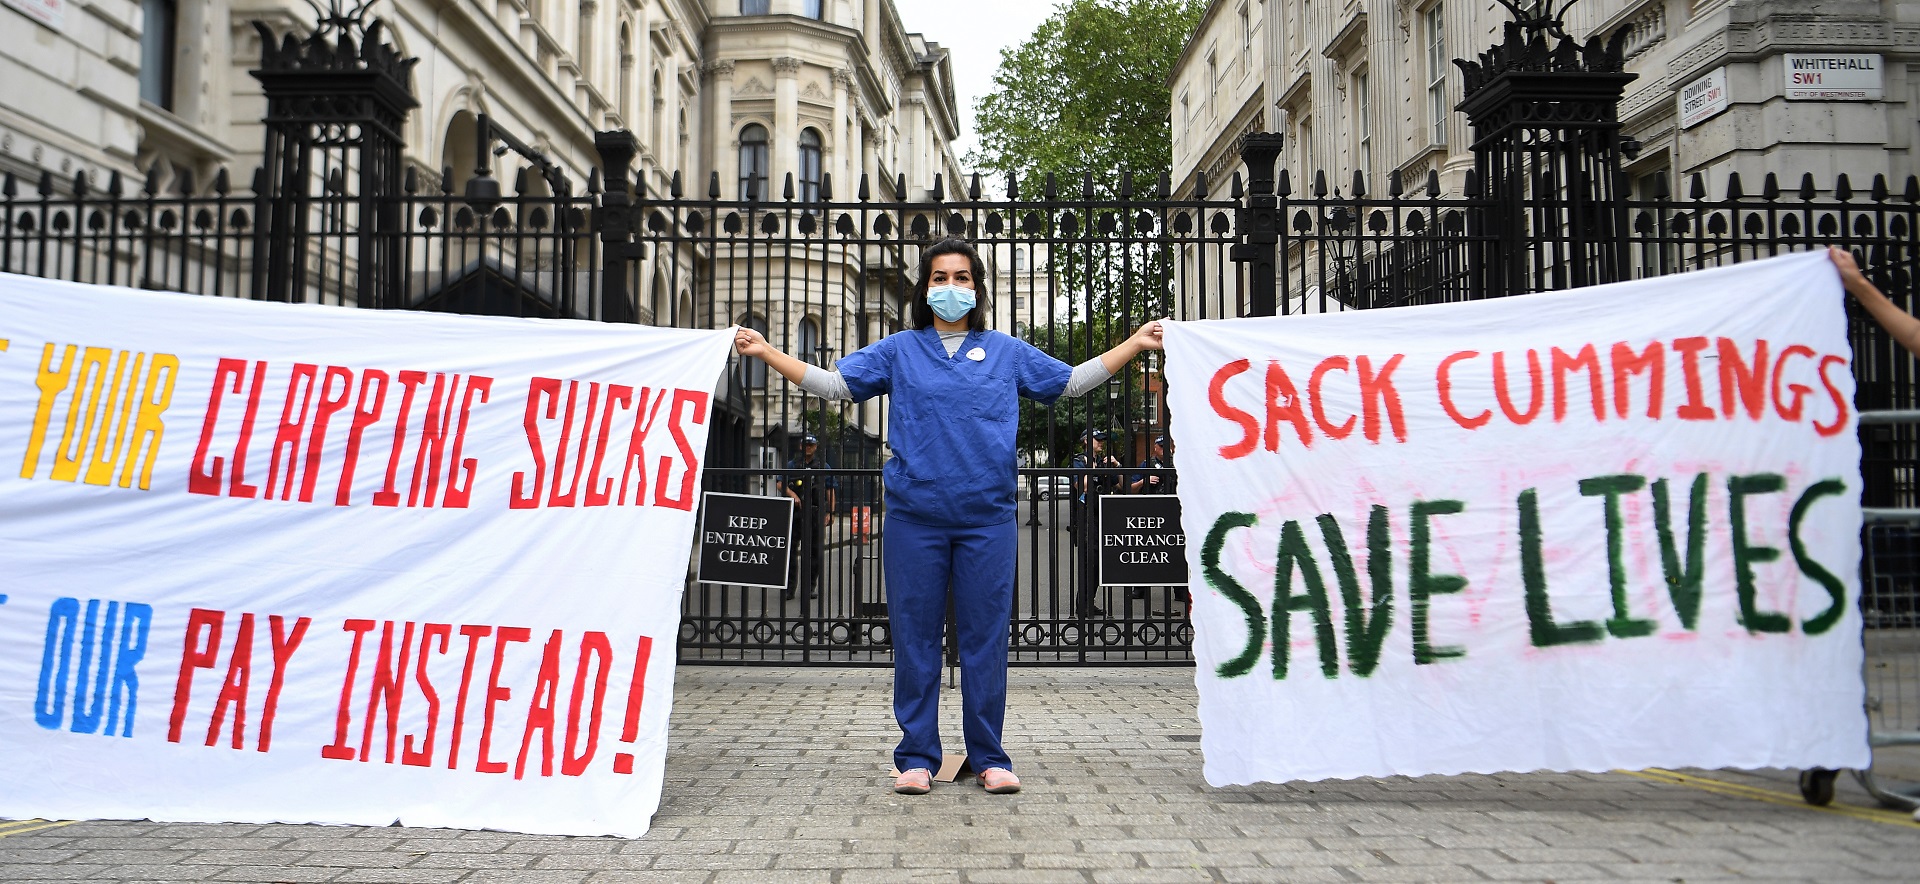 epa08462478 Nurses protests against the lockdown breach of Special Advisor Dominic Cummings outside 10 Downing Street in London, Britain, 03 June, 2020. Cummings broke lockdown regulations in April but has been backed by Prime Minister Boris Johnson. Calls for Cummings's resignation have increased since news broke the Cummings violated lockdown regulations when he and his wife - both suspected of showing Covid-19 symptoms - travelled across the country to self-isolate at a family's property.  EPA/ANDY RAIN